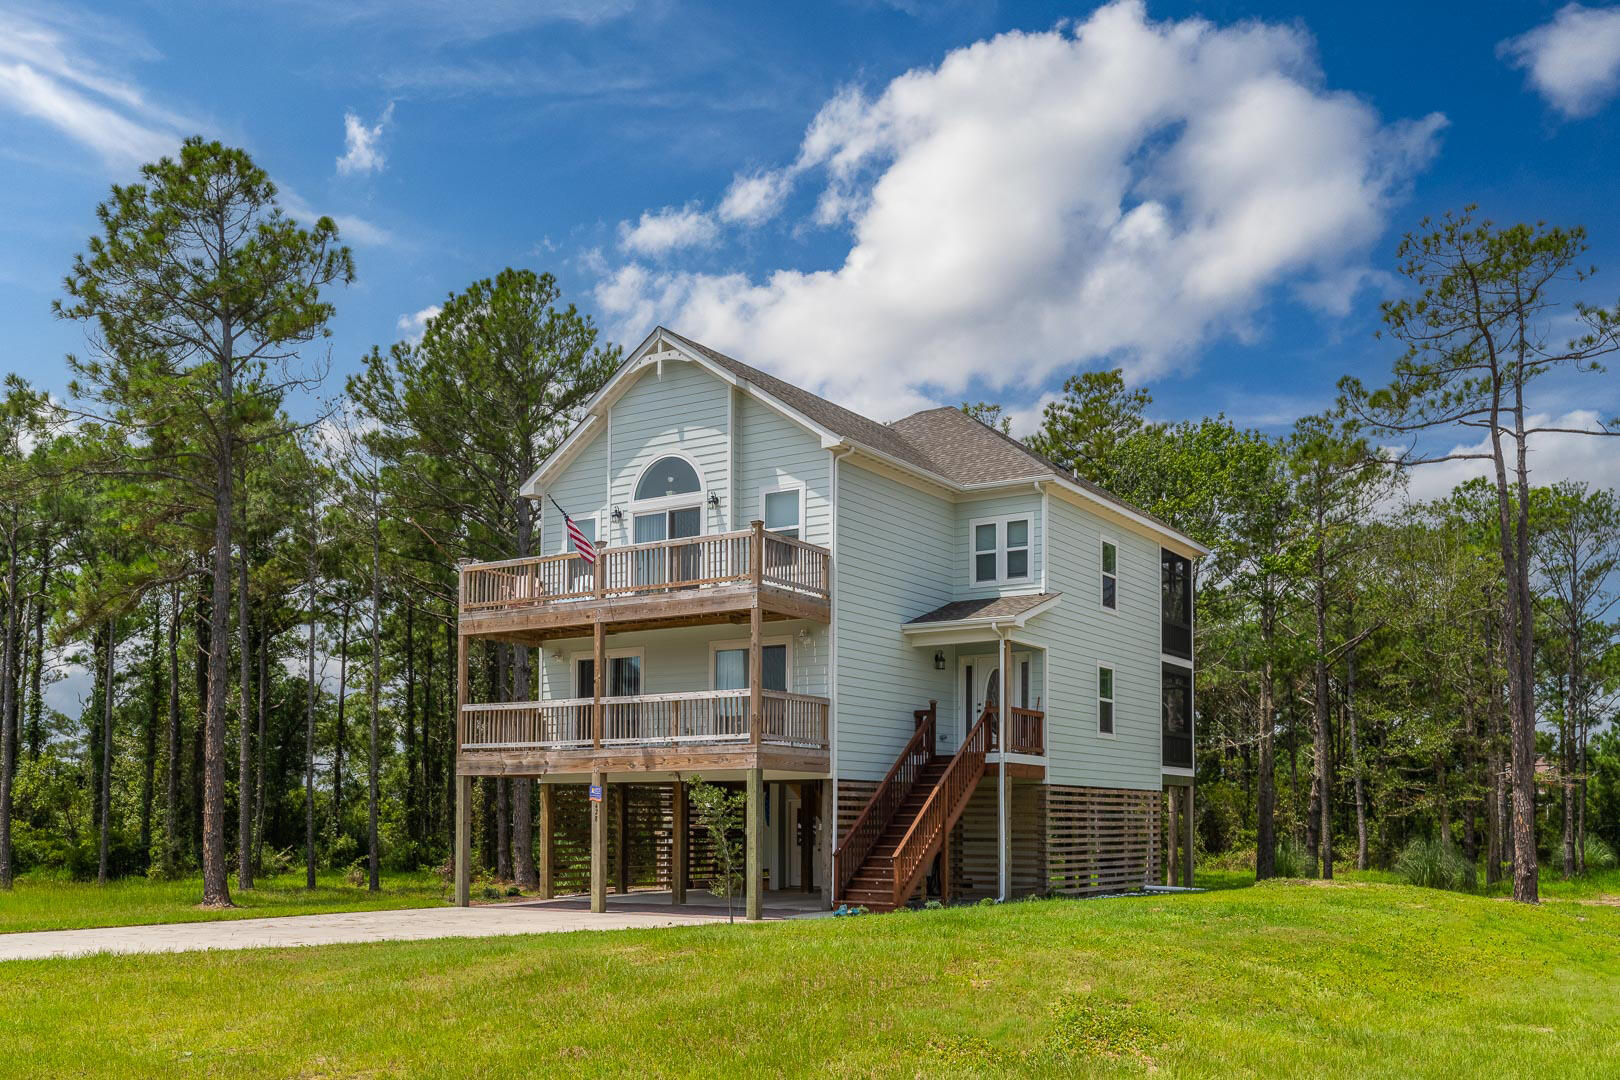 K8040 - OBX Ridgeview 4 Bedroom Home at South Ridge